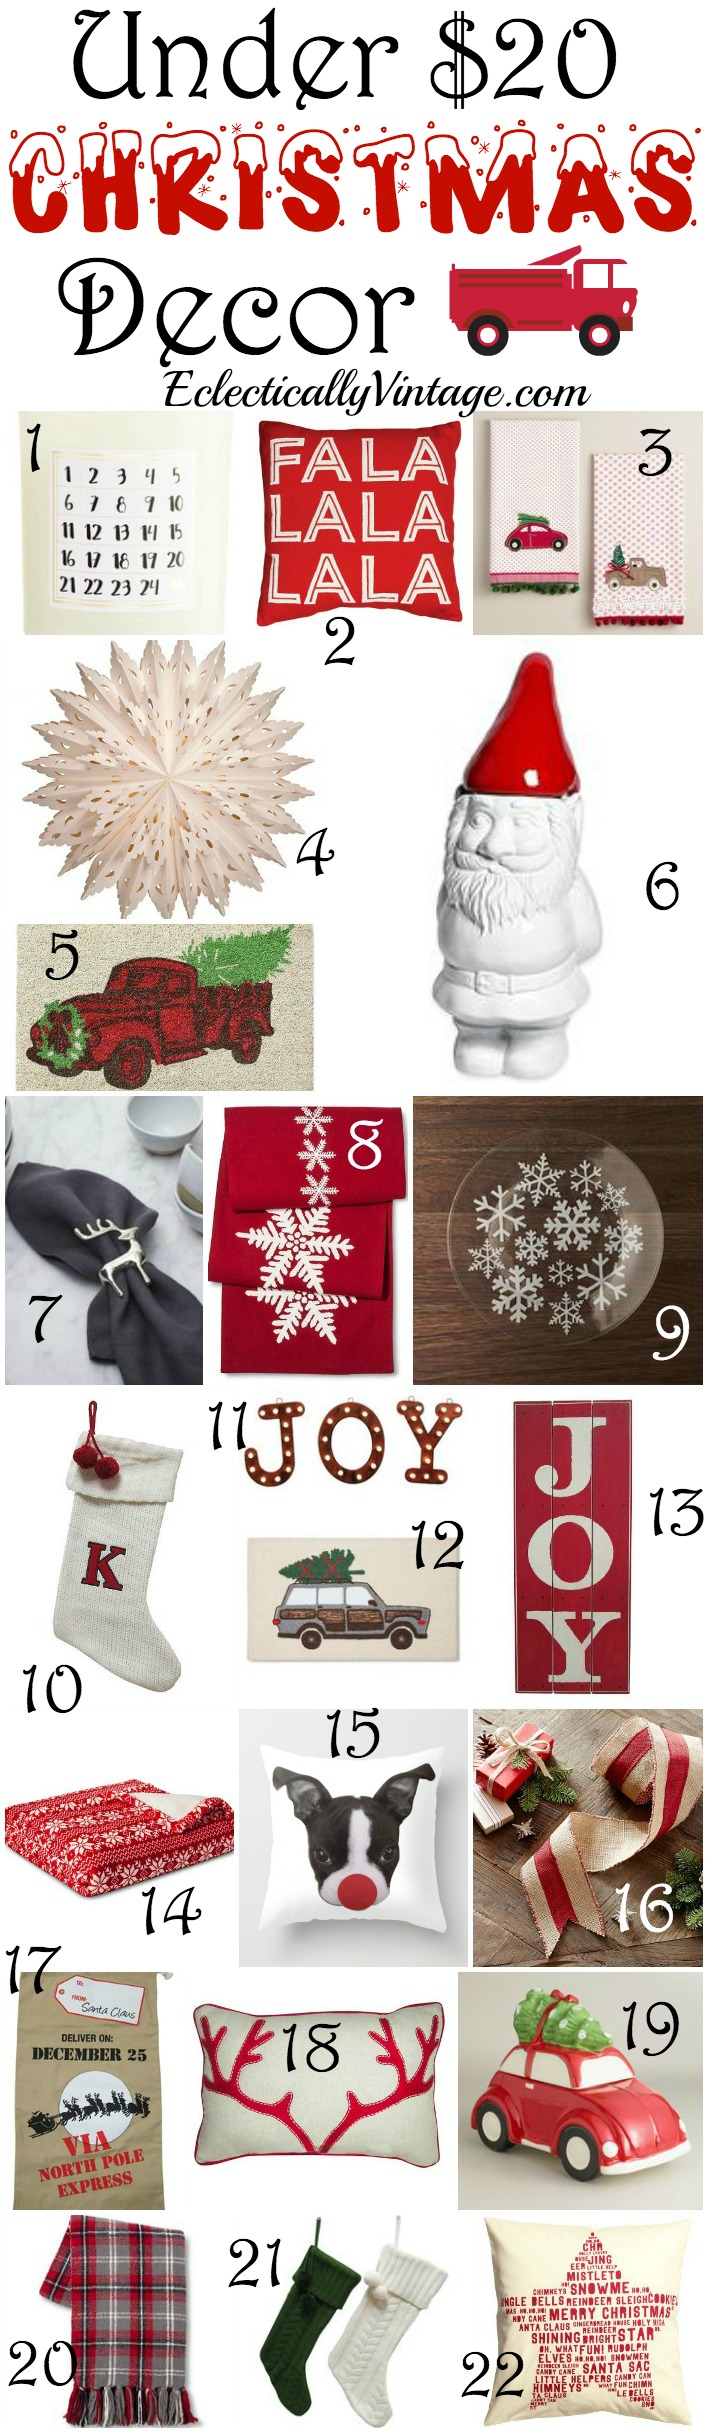 Favorite Under $20 Christmas Decor - more than 30 inexpensive items to deck your halls kellyelko.com